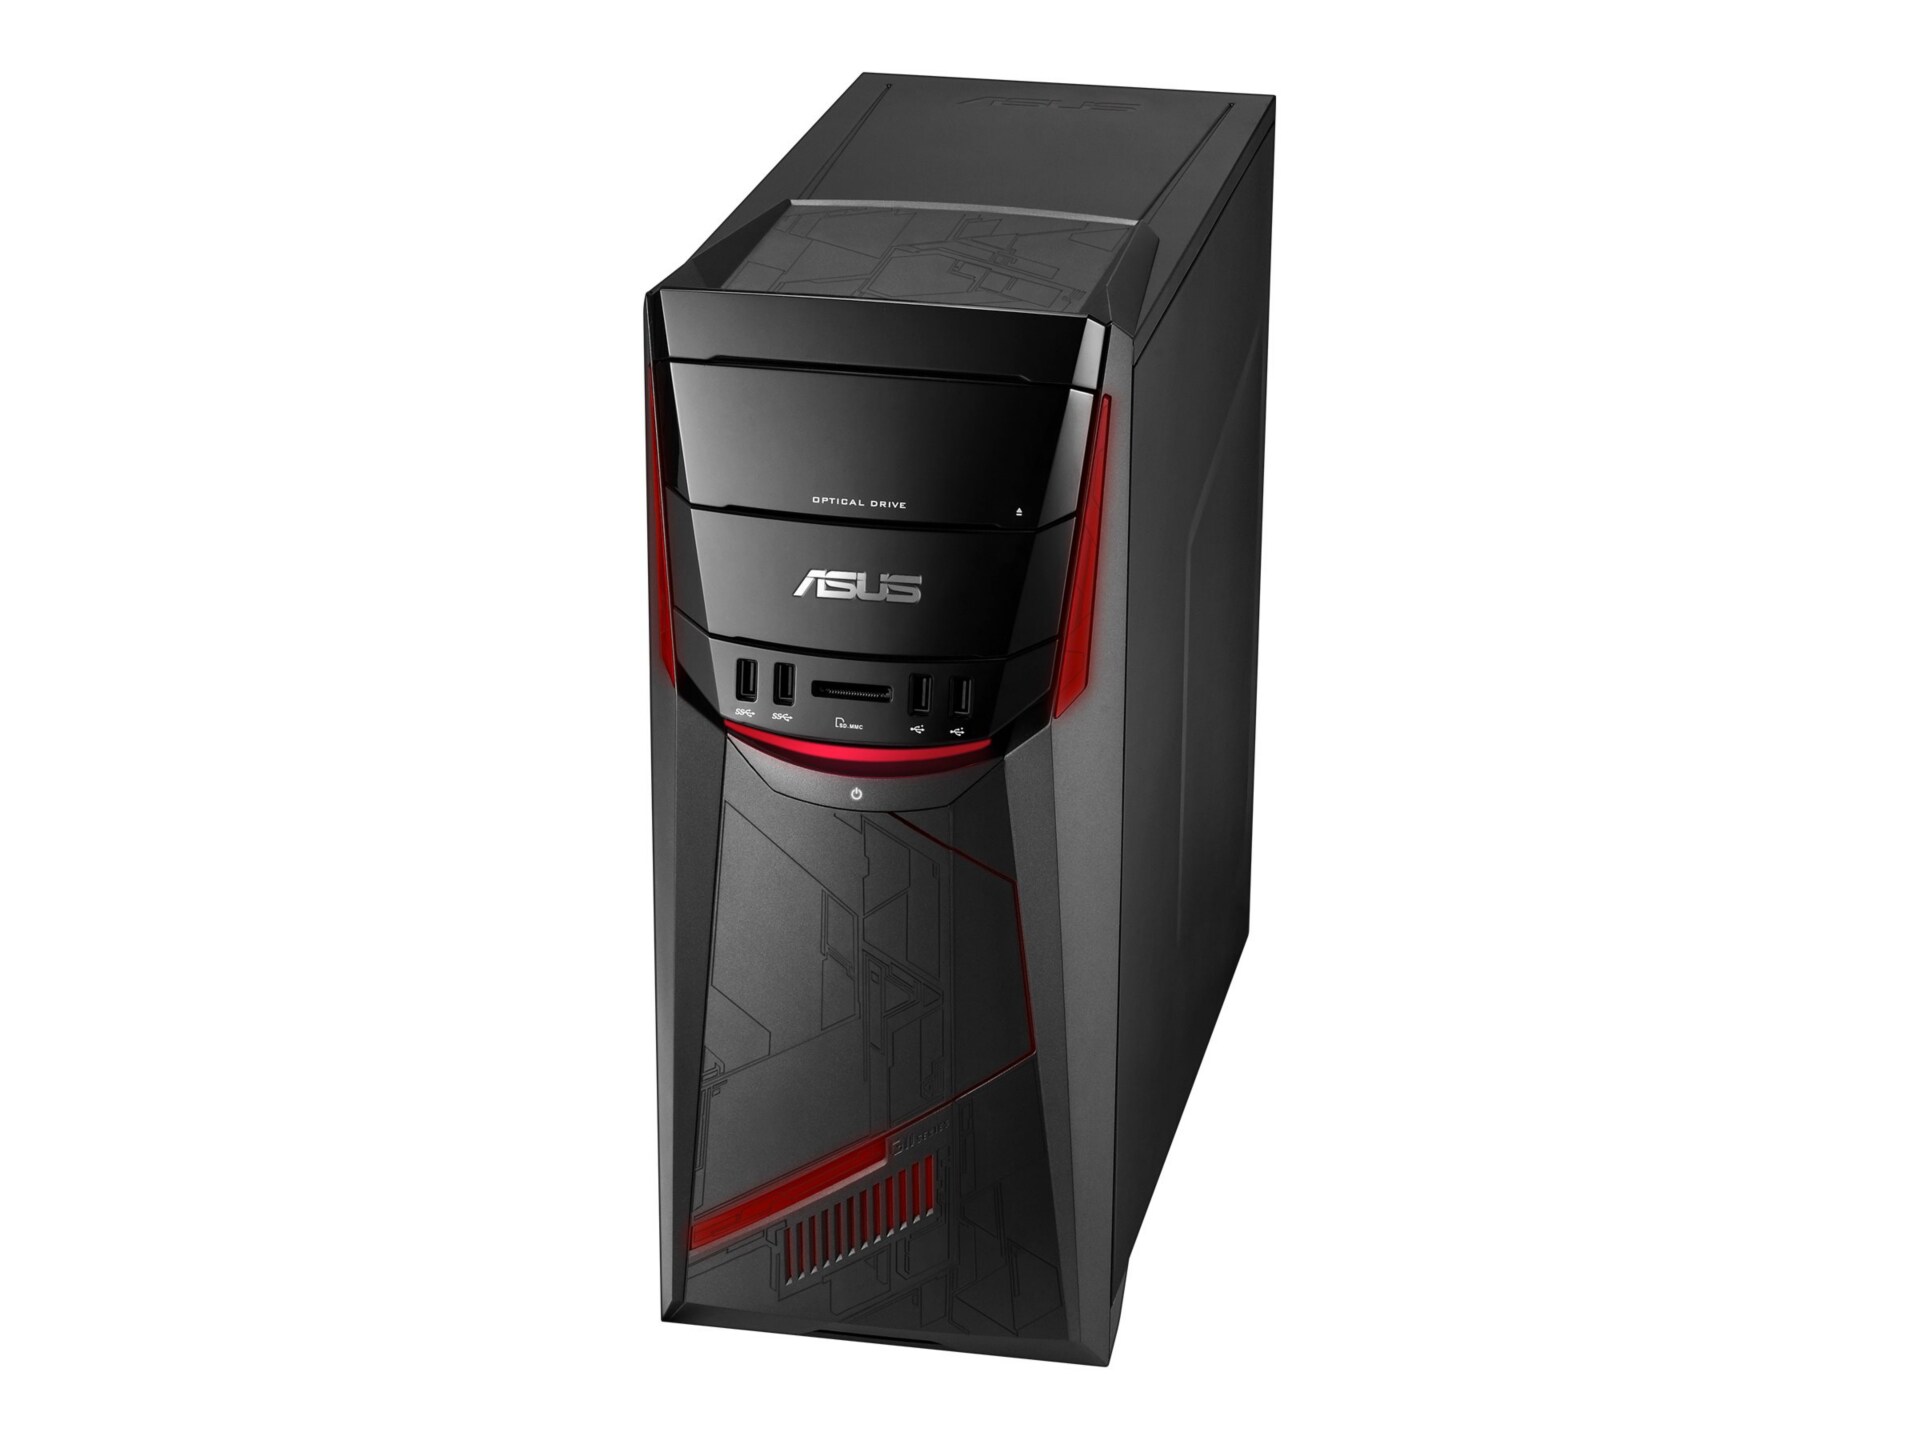 ASUS G11CB-US014T - tower - Core i7 6700 3.4 GHz - 16 GB - 2.512 TB